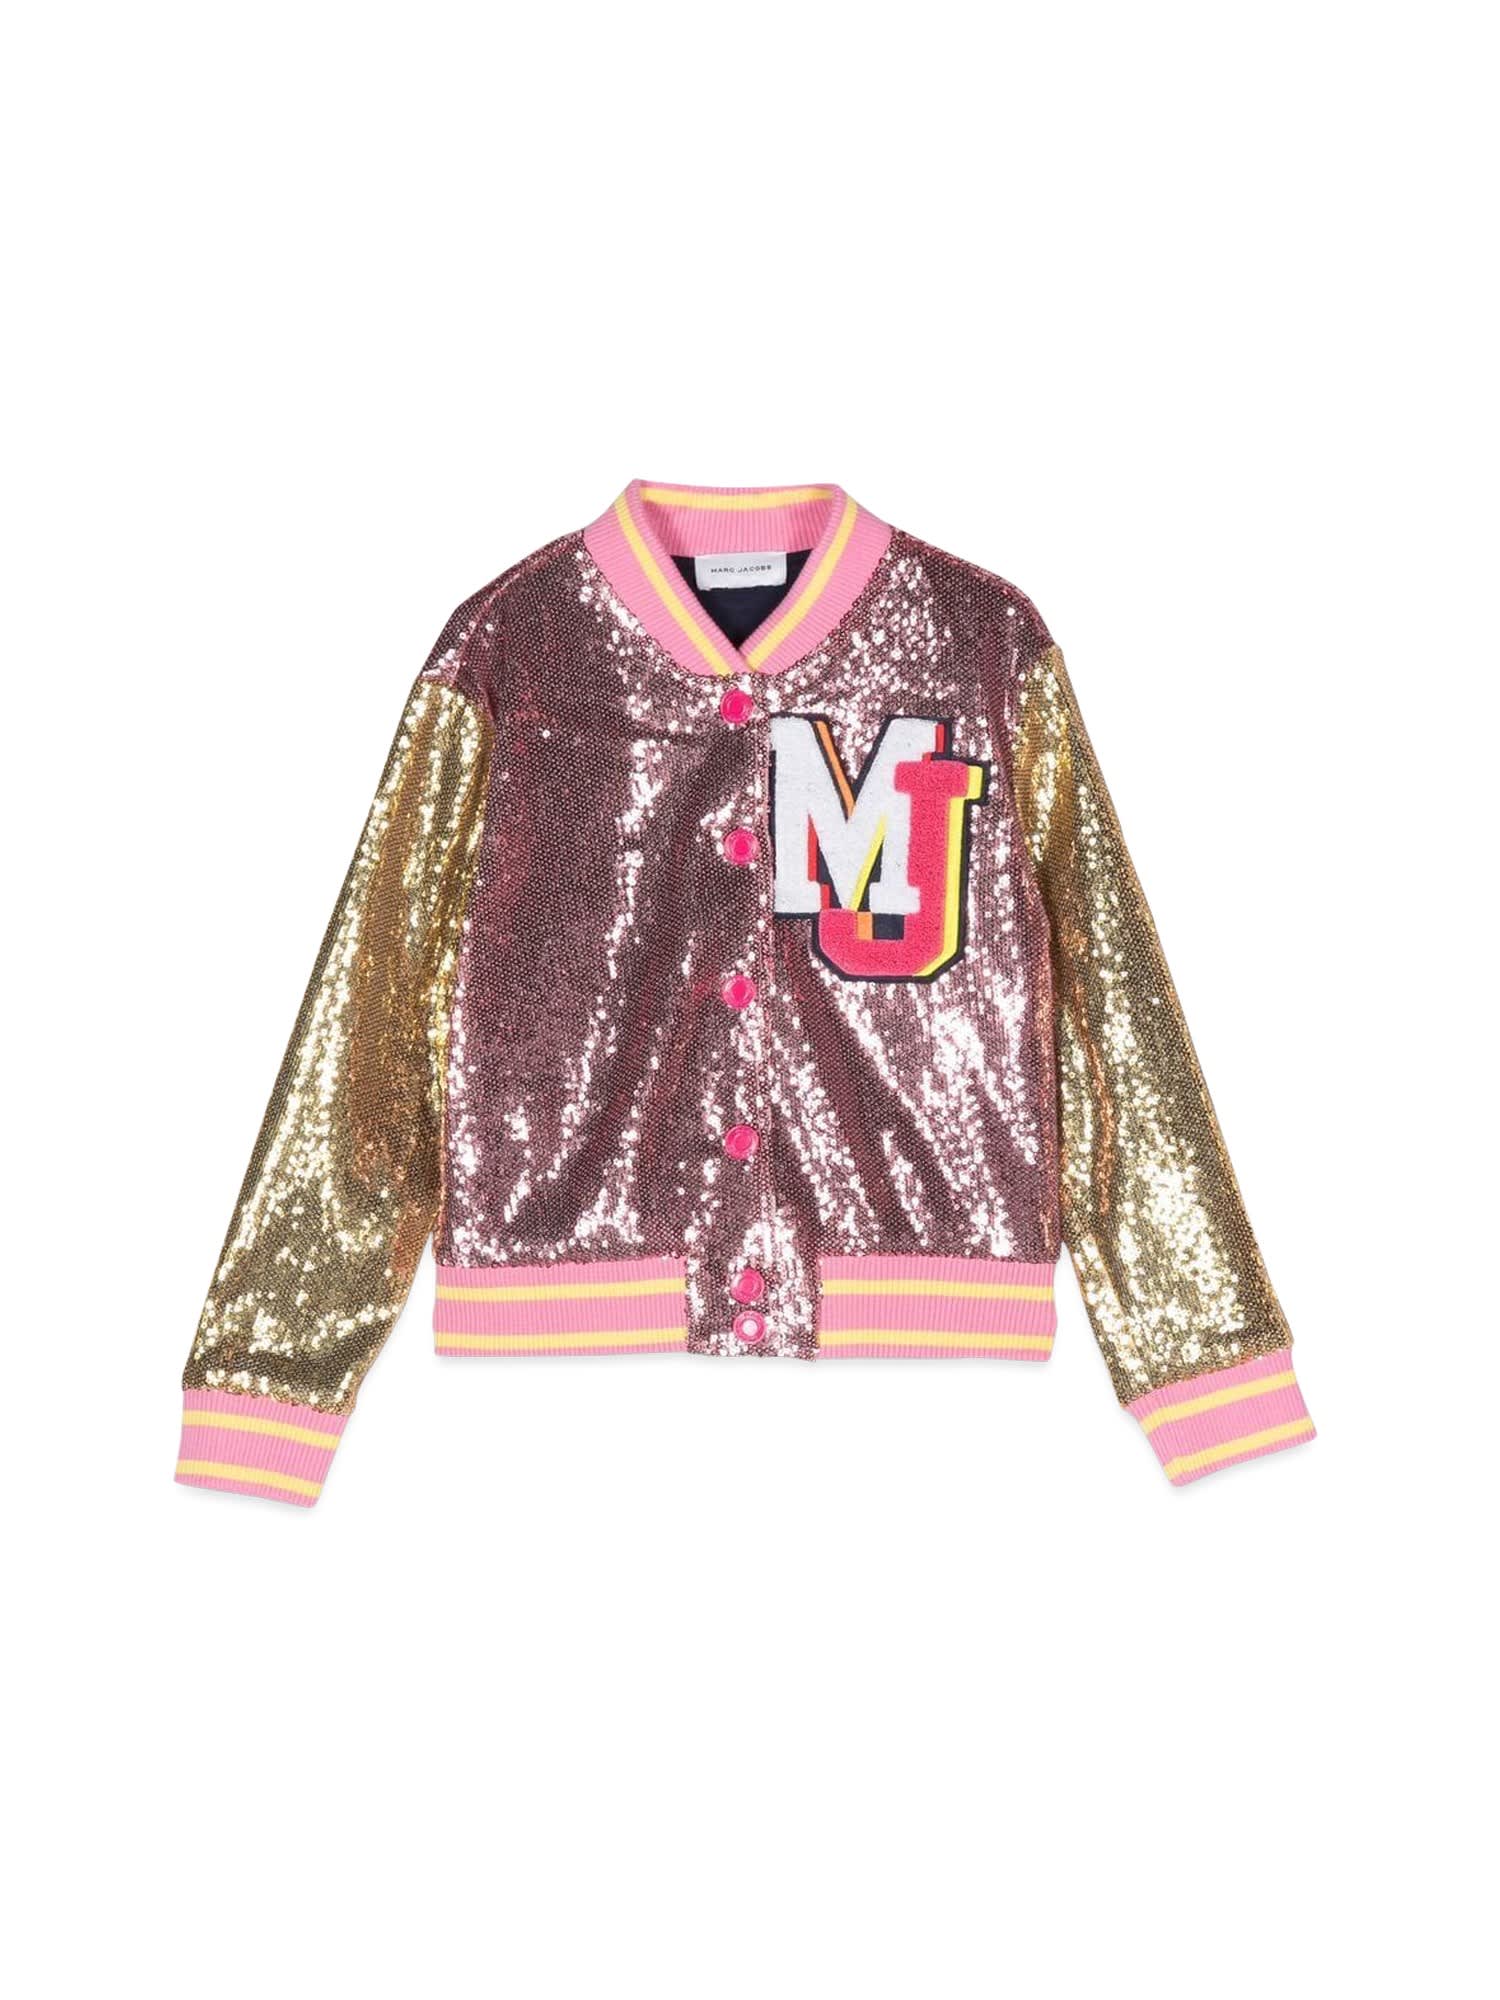 MARC JACOBS TEDDY BOMBER JACKET WITH SEQUINS